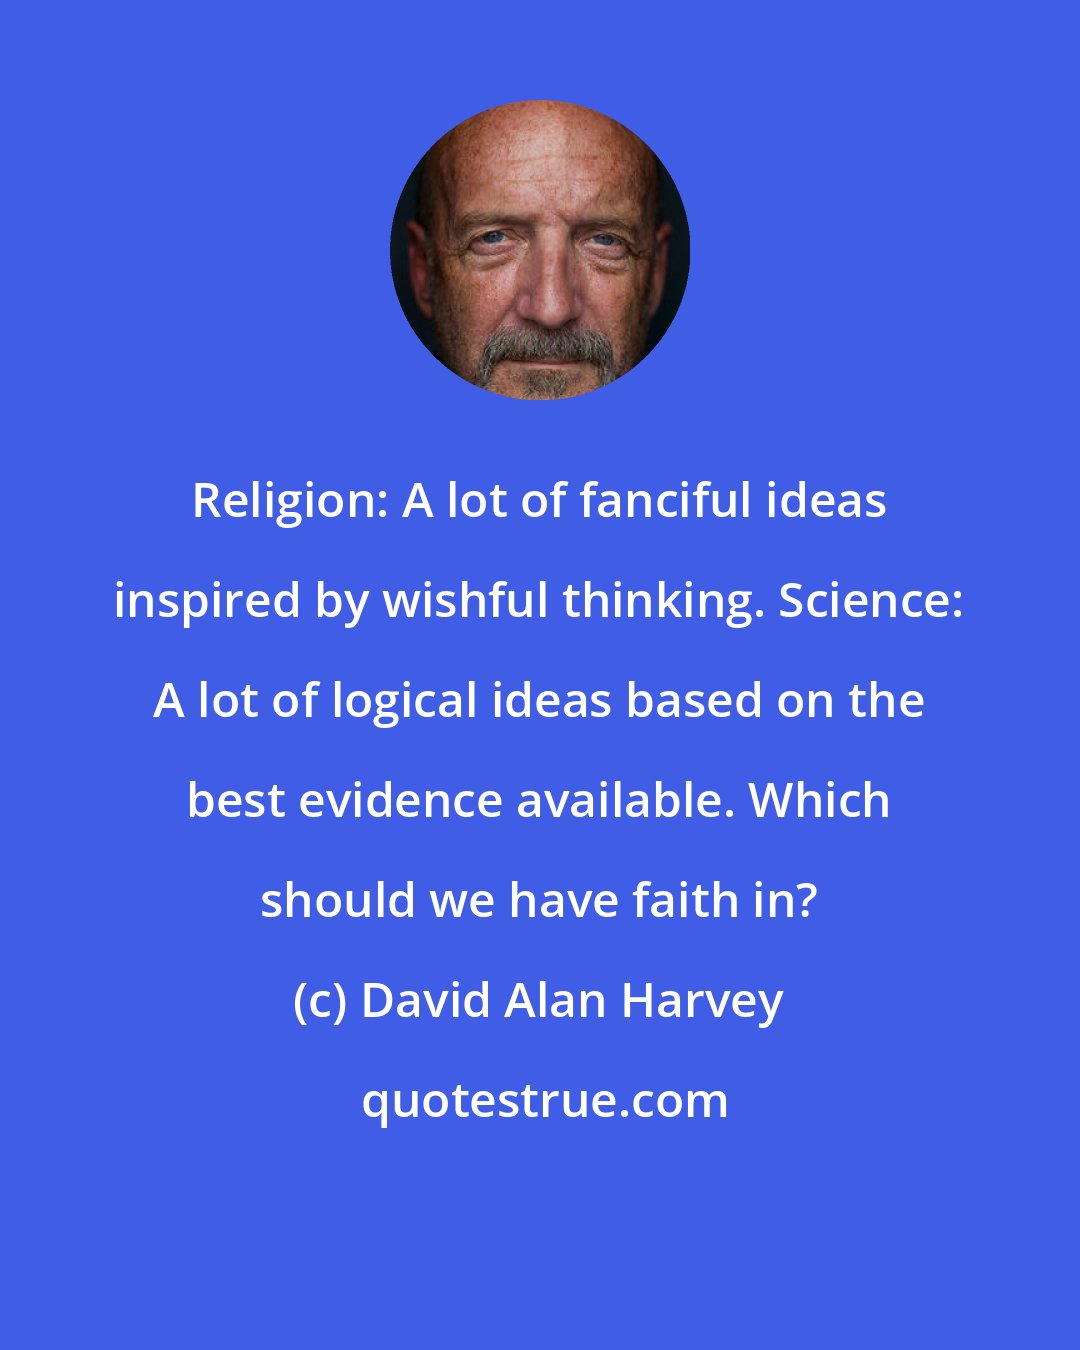 David Alan Harvey: Religion: A lot of fanciful ideas inspired by wishful thinking. Science: A lot of logical ideas based on the best evidence available. Which should we have faith in?